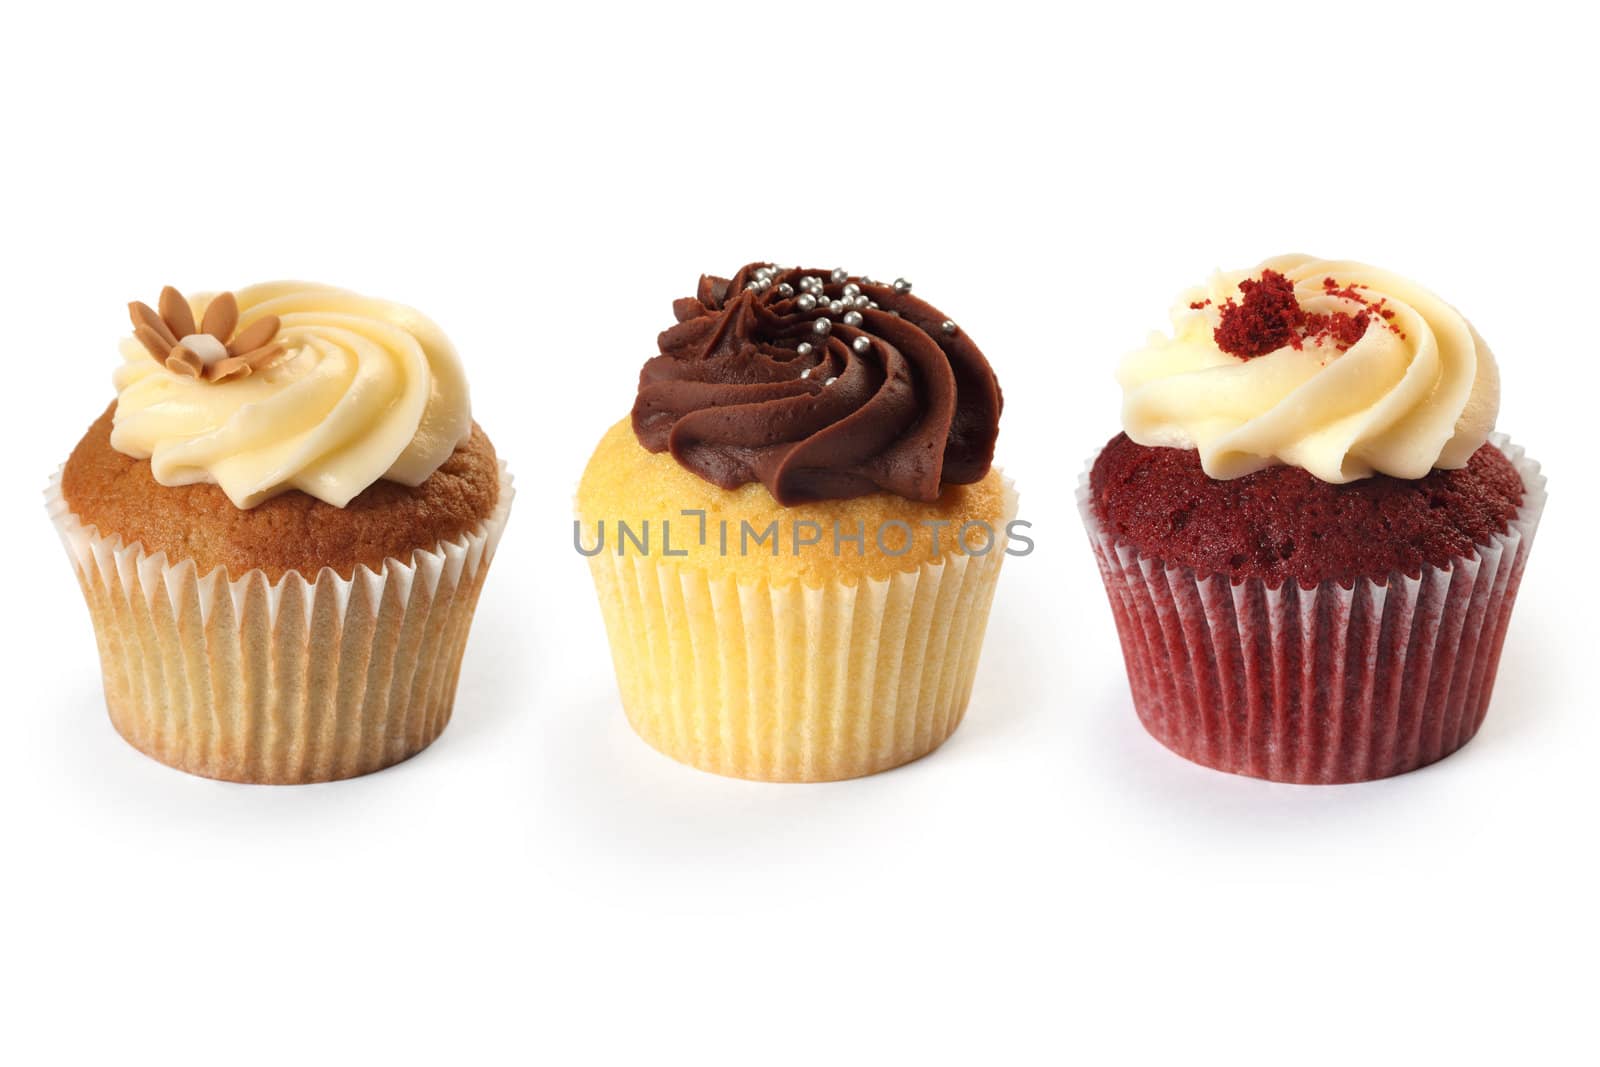 Photo of three different flavored cupcakes on white background.
